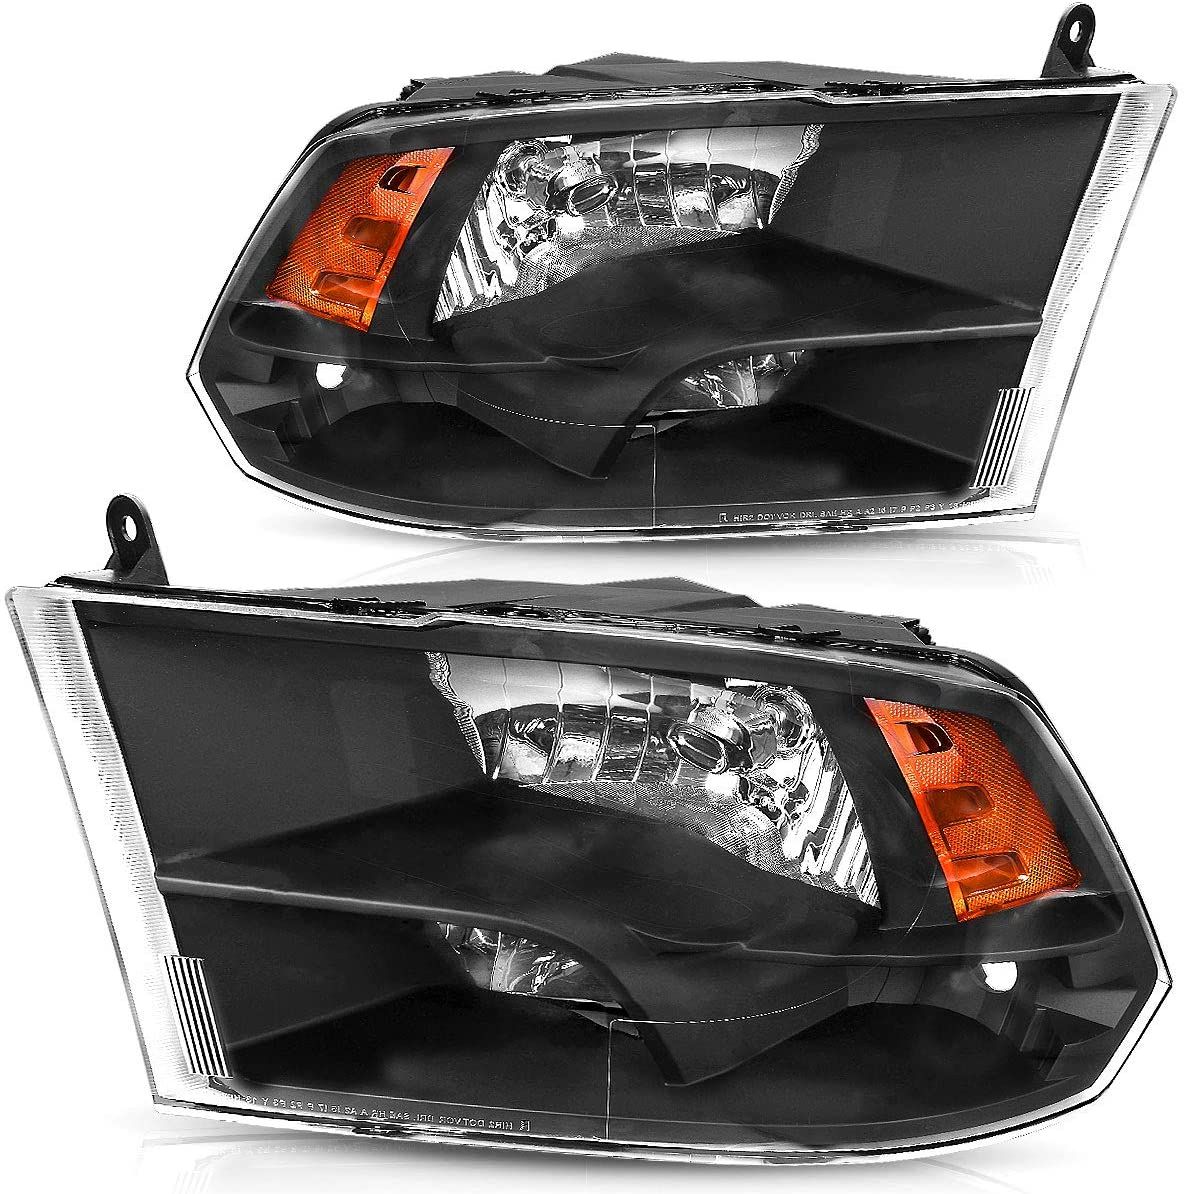 OEDRO? Amber Reflector Clear Lens Black Housing Headlights Assembly for 2009-2018 Dodge Ram 1500 2500 3500 Quad Cab